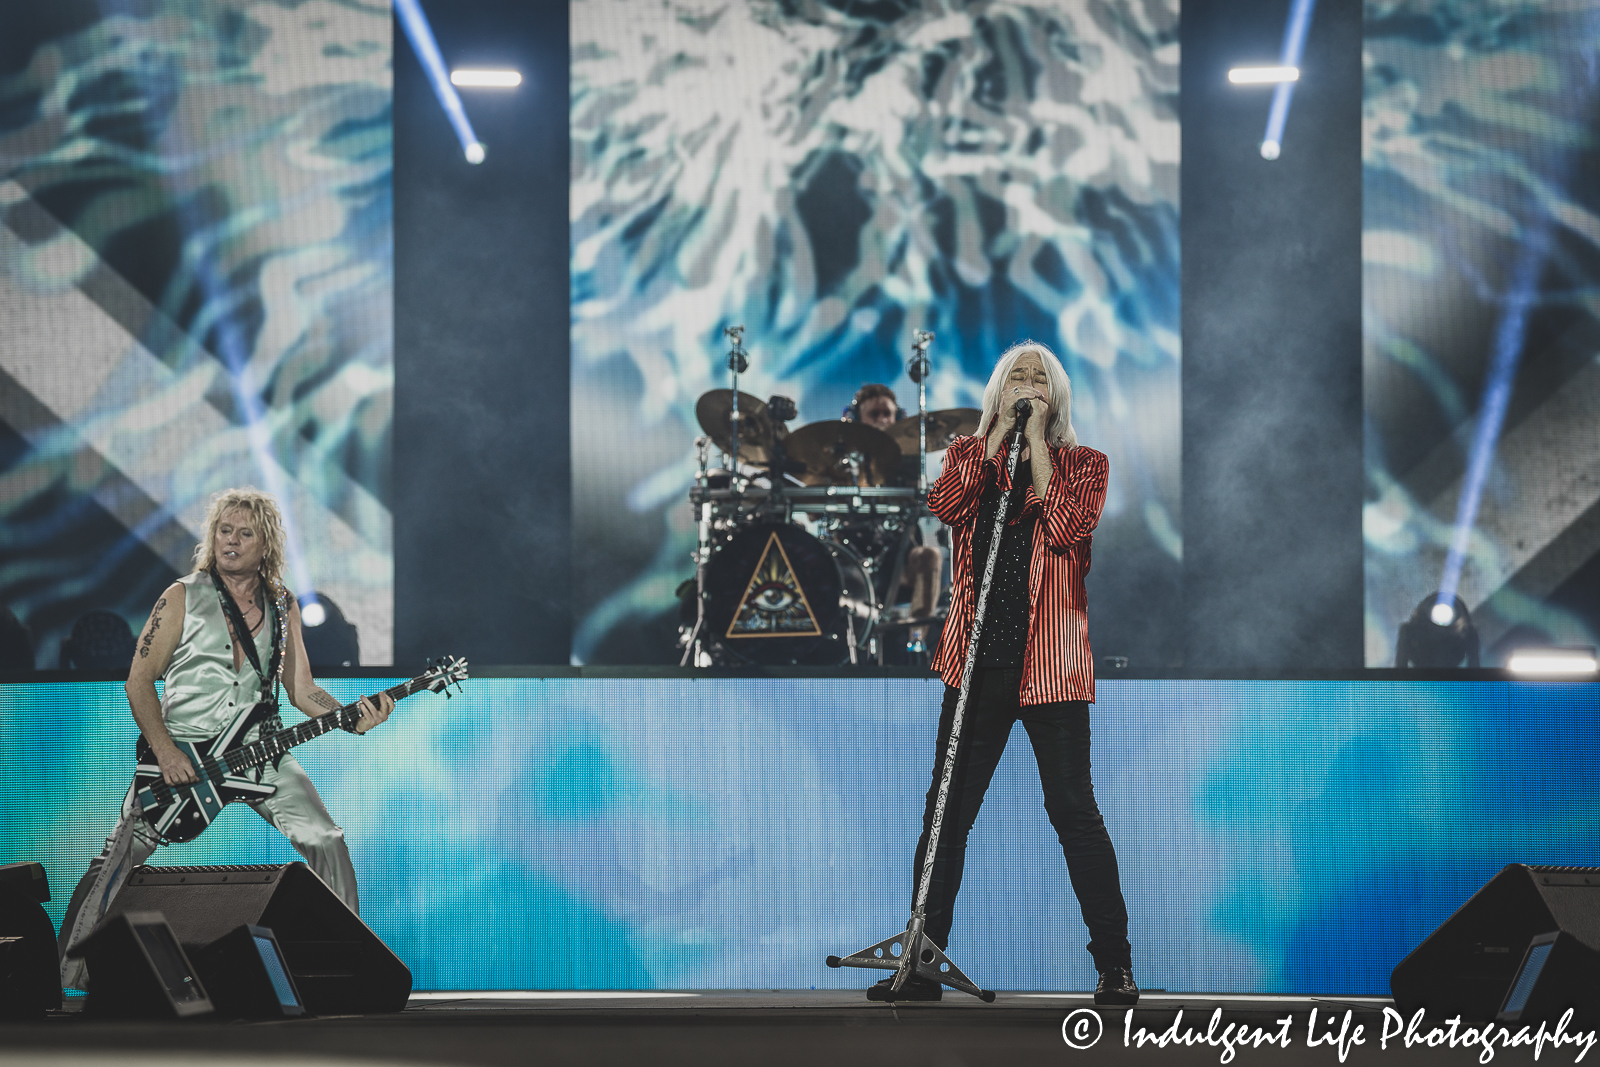 Def Leppard frontman Joe Elliot opening the headlining set with bass player Rick Savage and drummer Rick Allen during the Kauffman Stadium concert in Kansas City, MO on July 19, 2022.